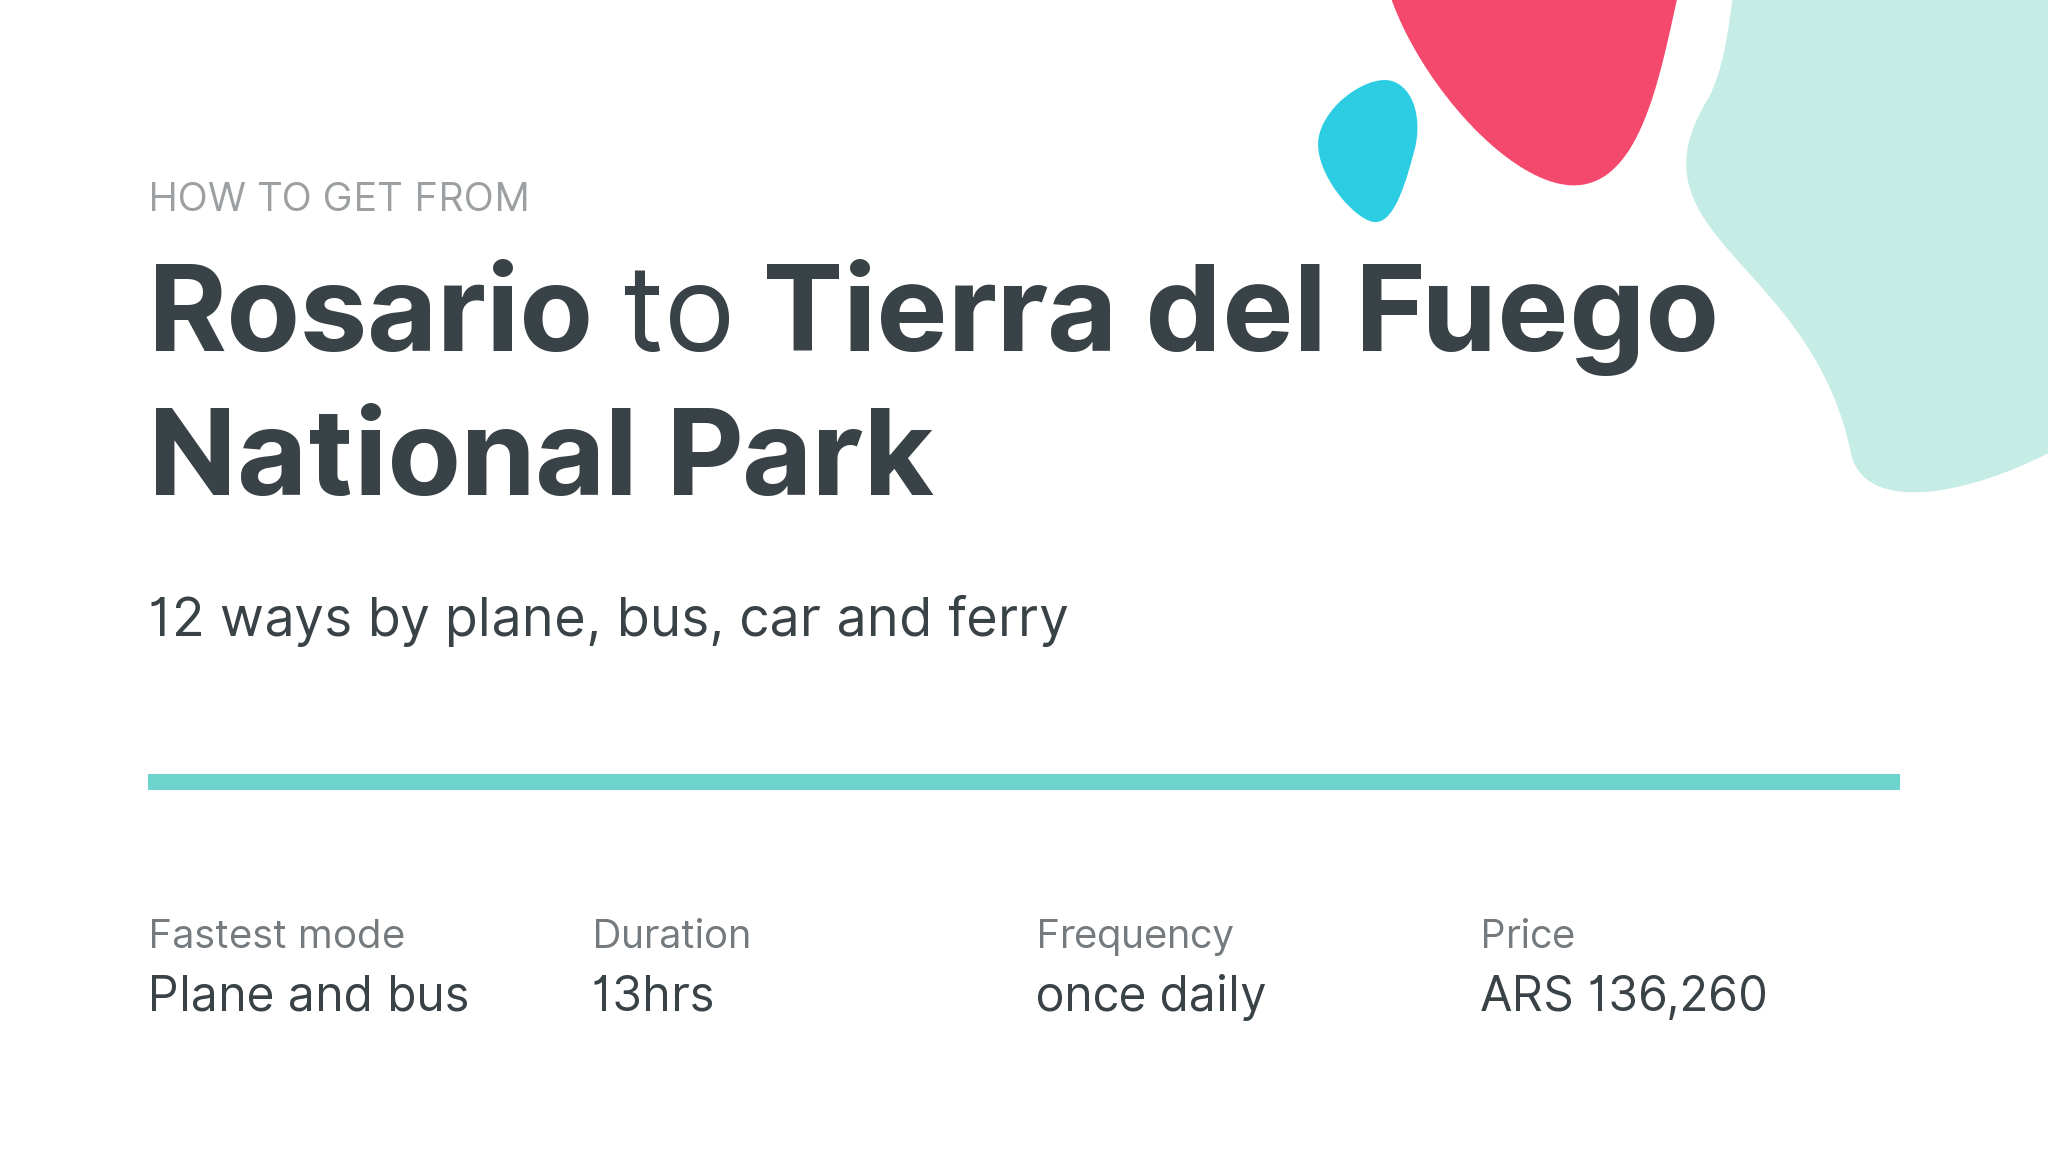 How do I get from Rosario to Tierra del Fuego National Park